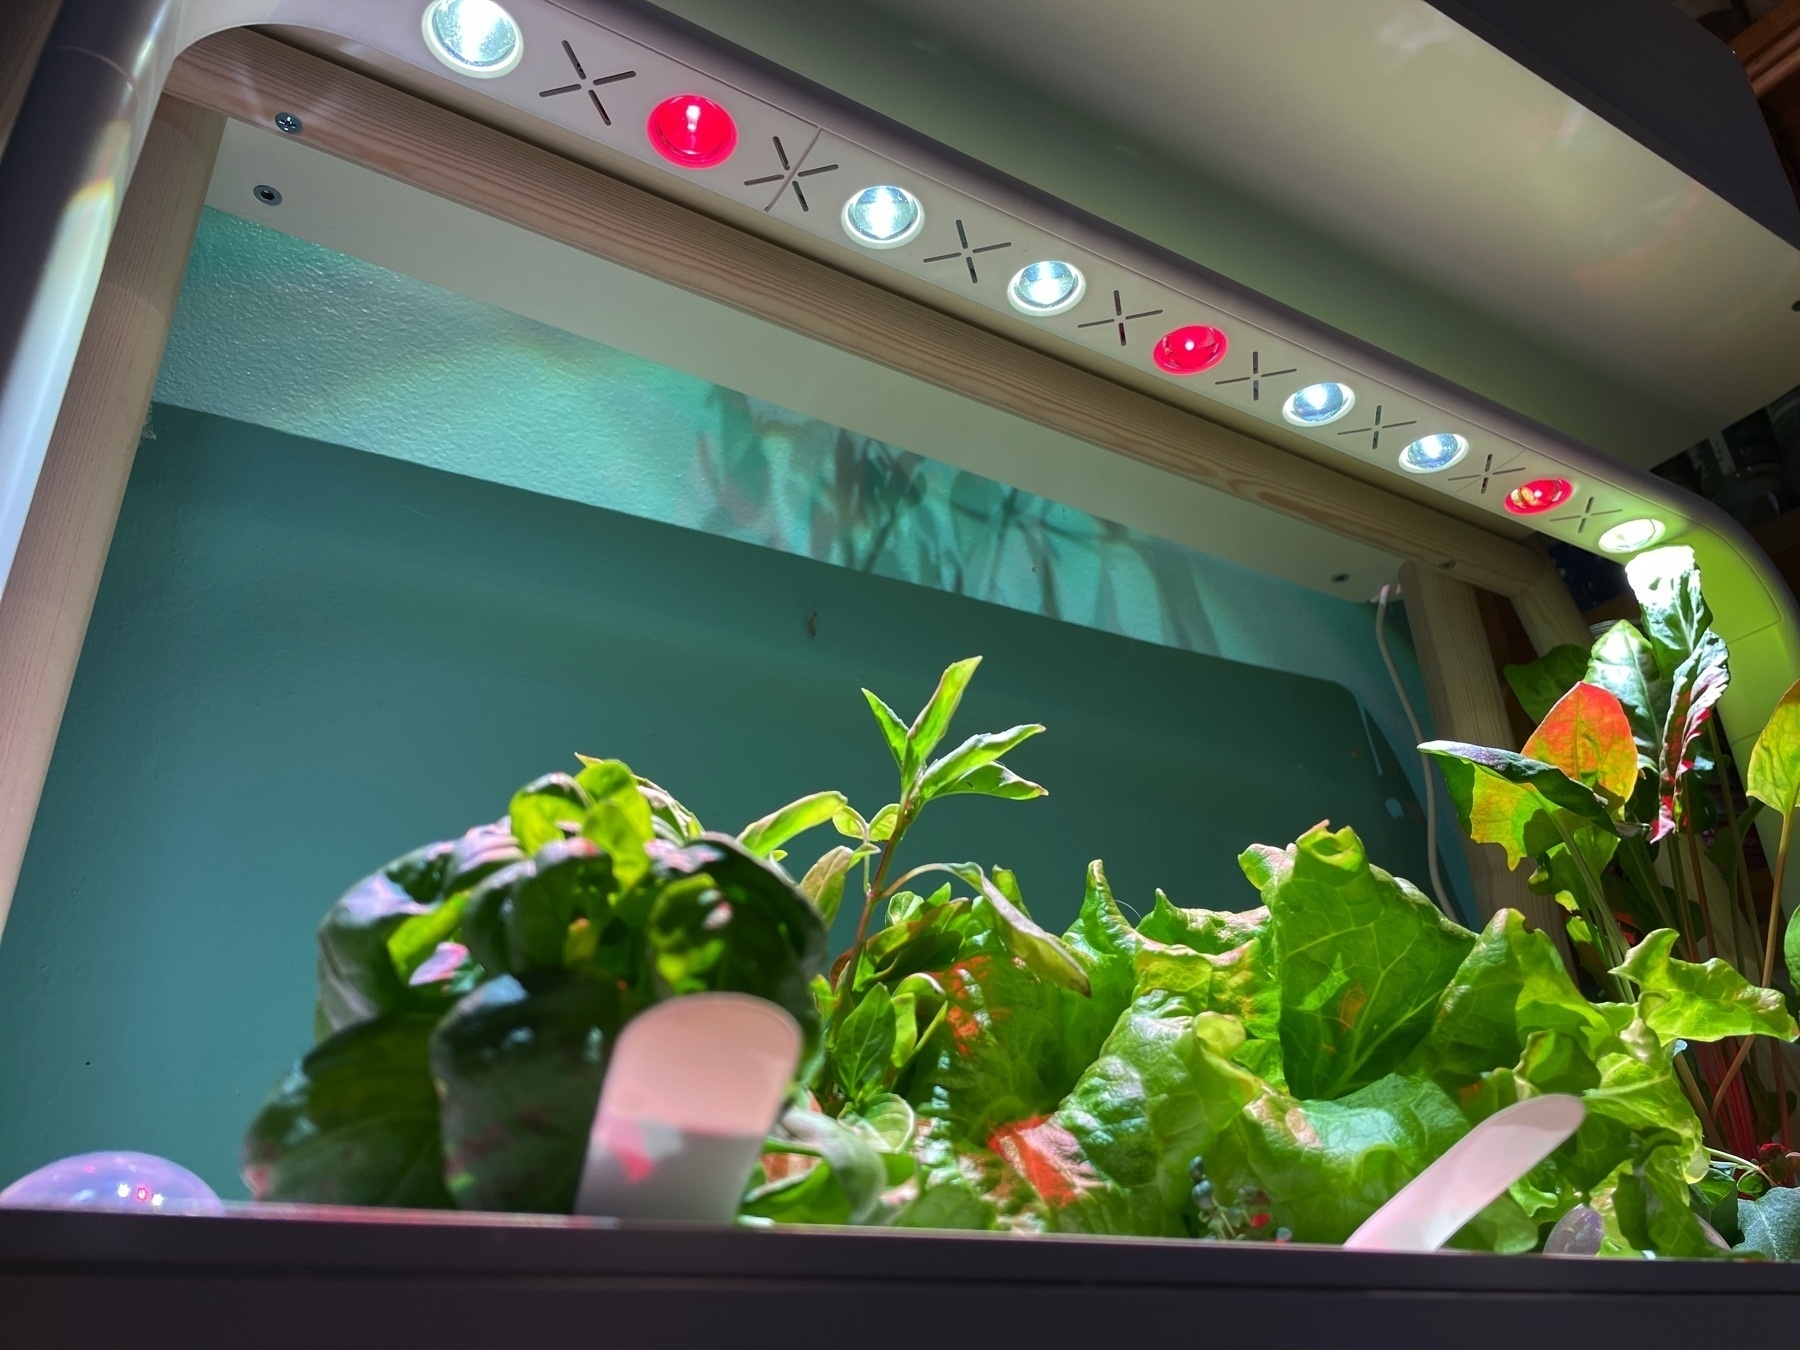 Lights of of hydroponic gardening system.